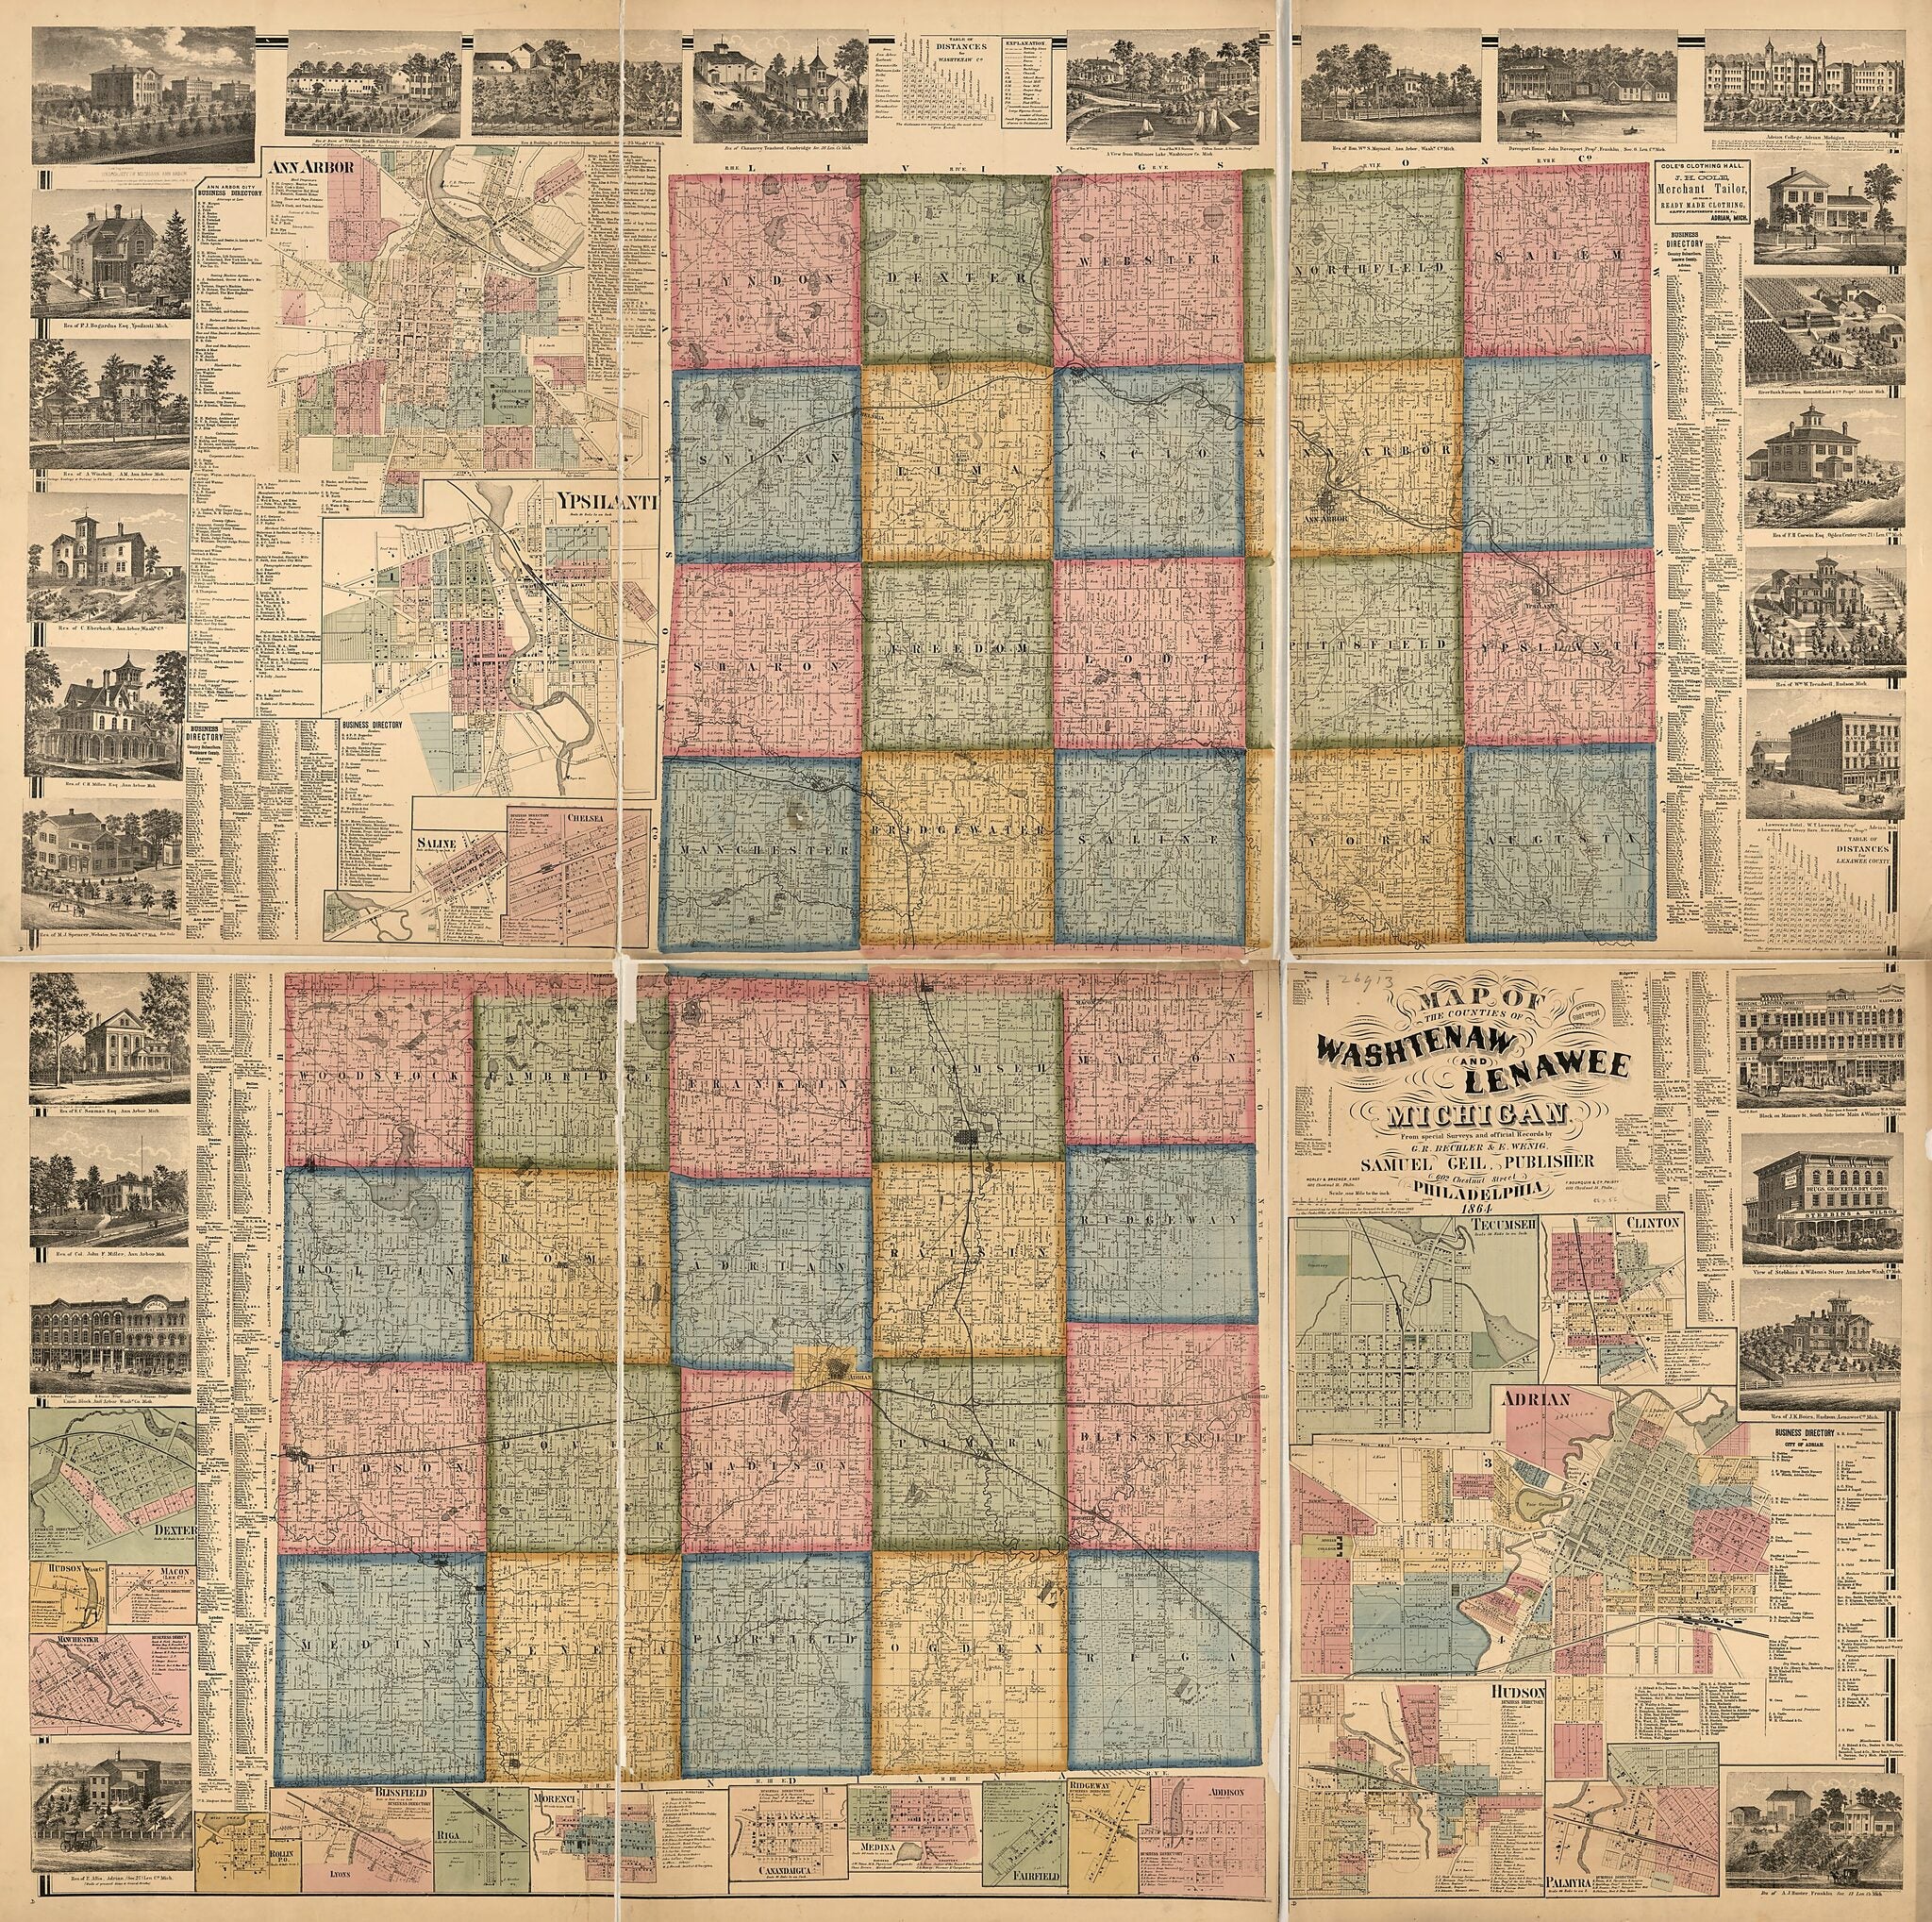 This old map of Map of the Counties of Washtenaw and Lenawee, Michigan from 1864 was created by Gustavus R. Bechler, Samuel Geil, E. Wenig,  Worley &amp; Bracher in 1864